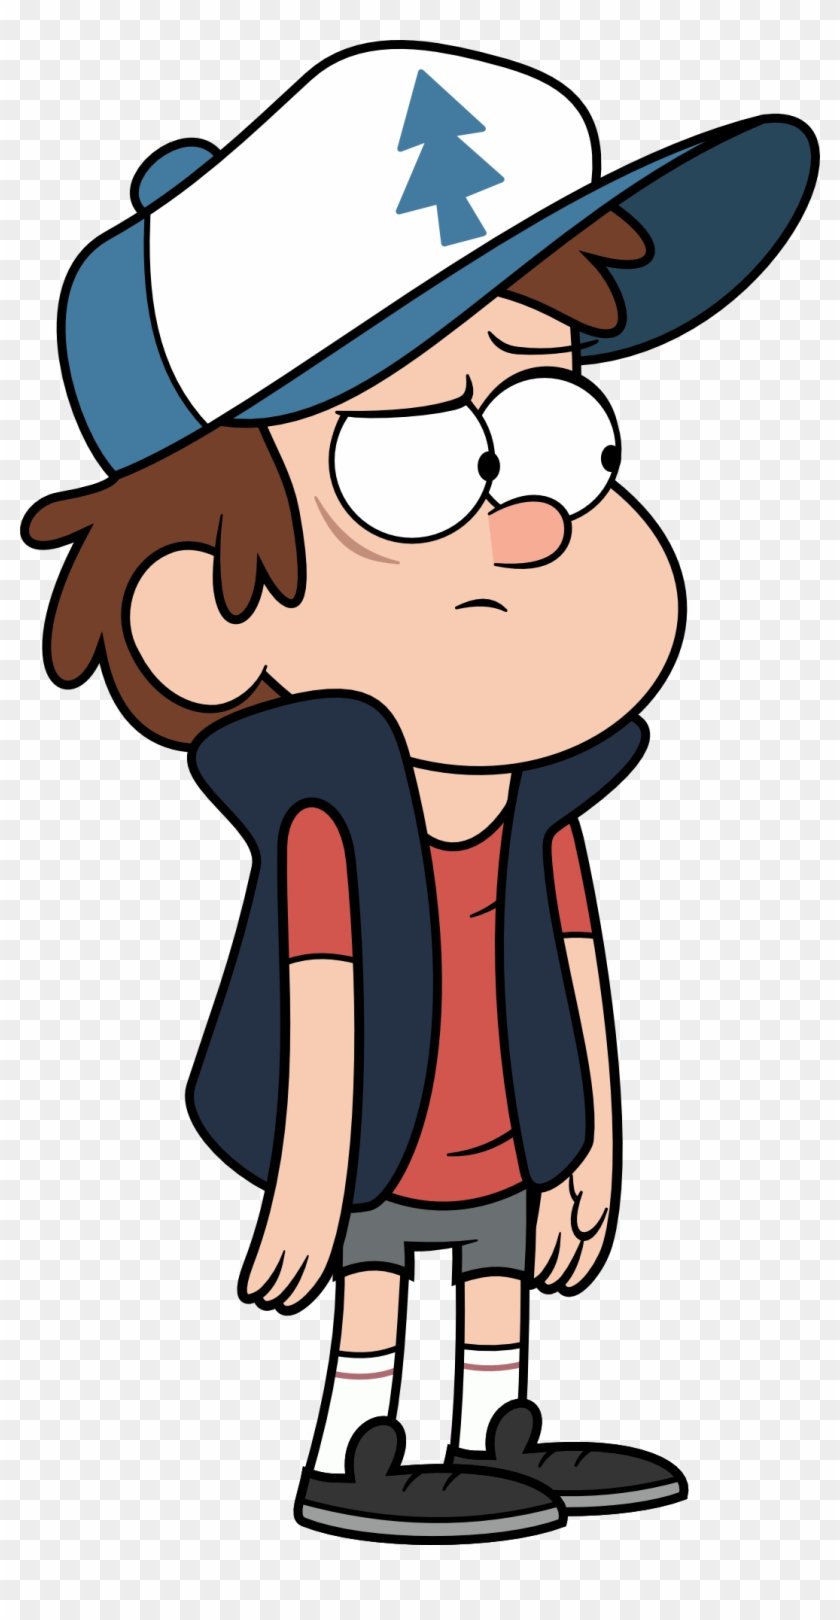 Dipper Pines 1 By Philiptomkins Dipper Pines 1 By Philiptomkins - Dipper From Gravity Falls #629721